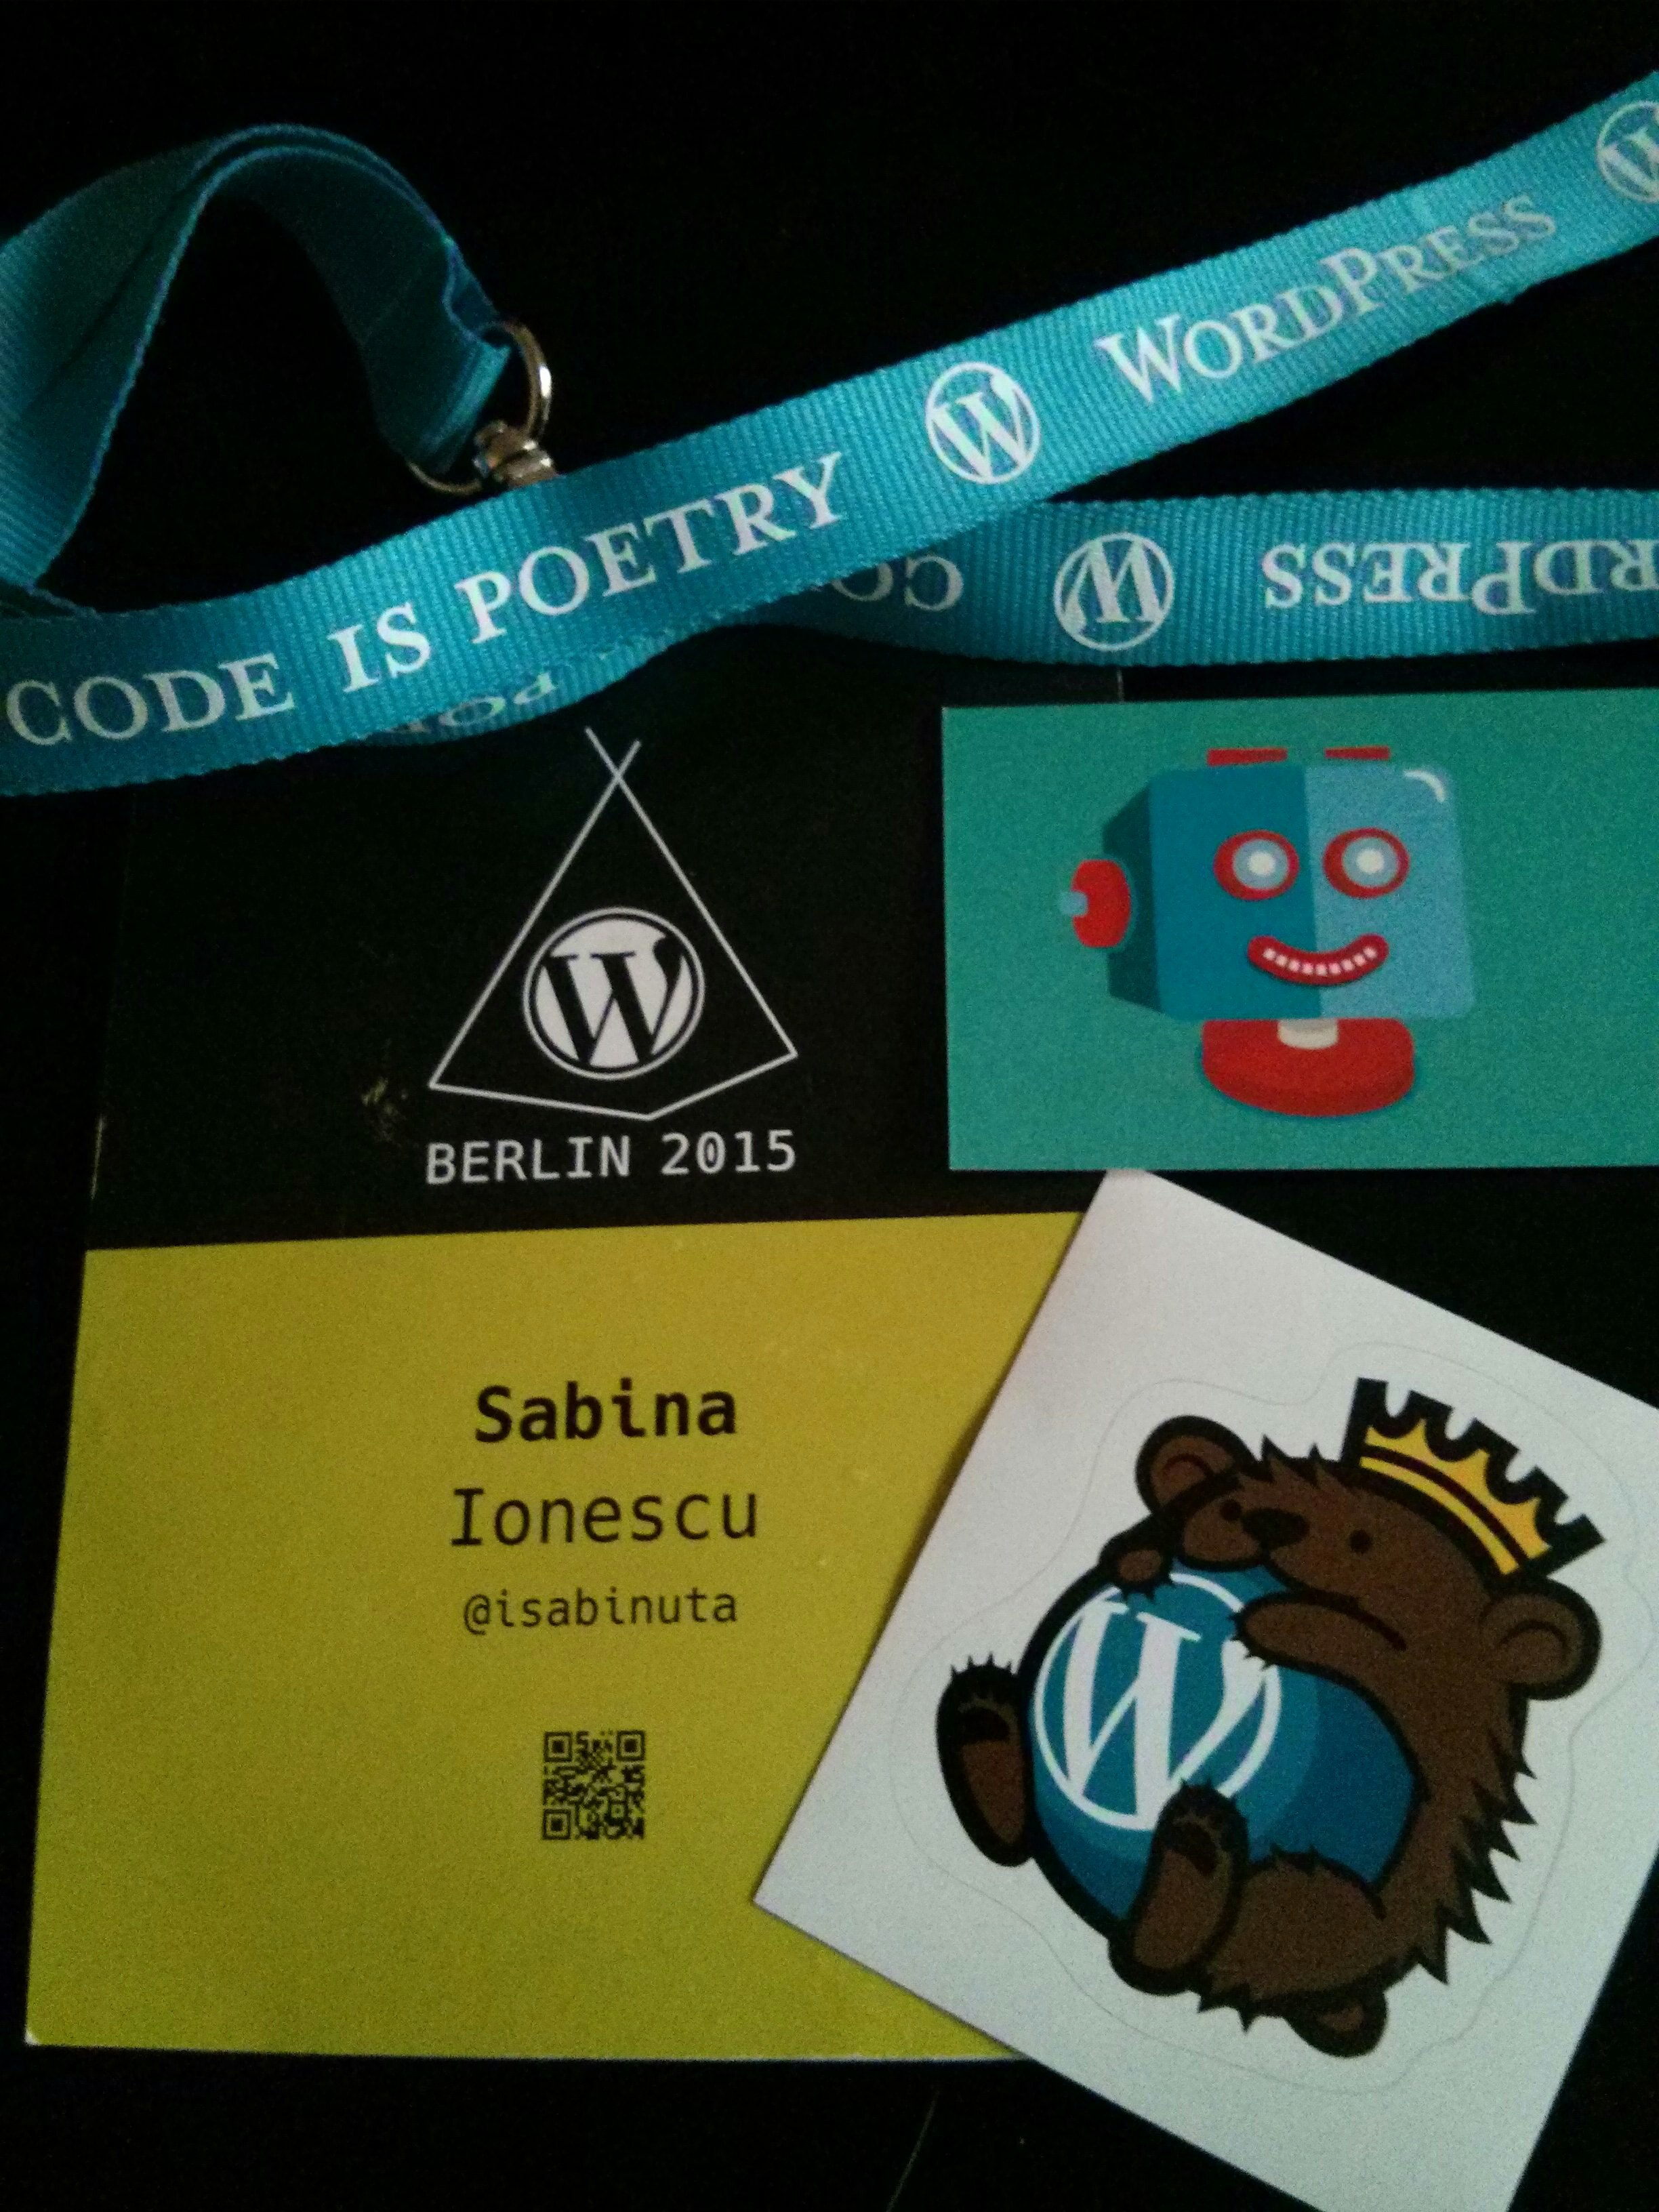 WordCamp offical badge